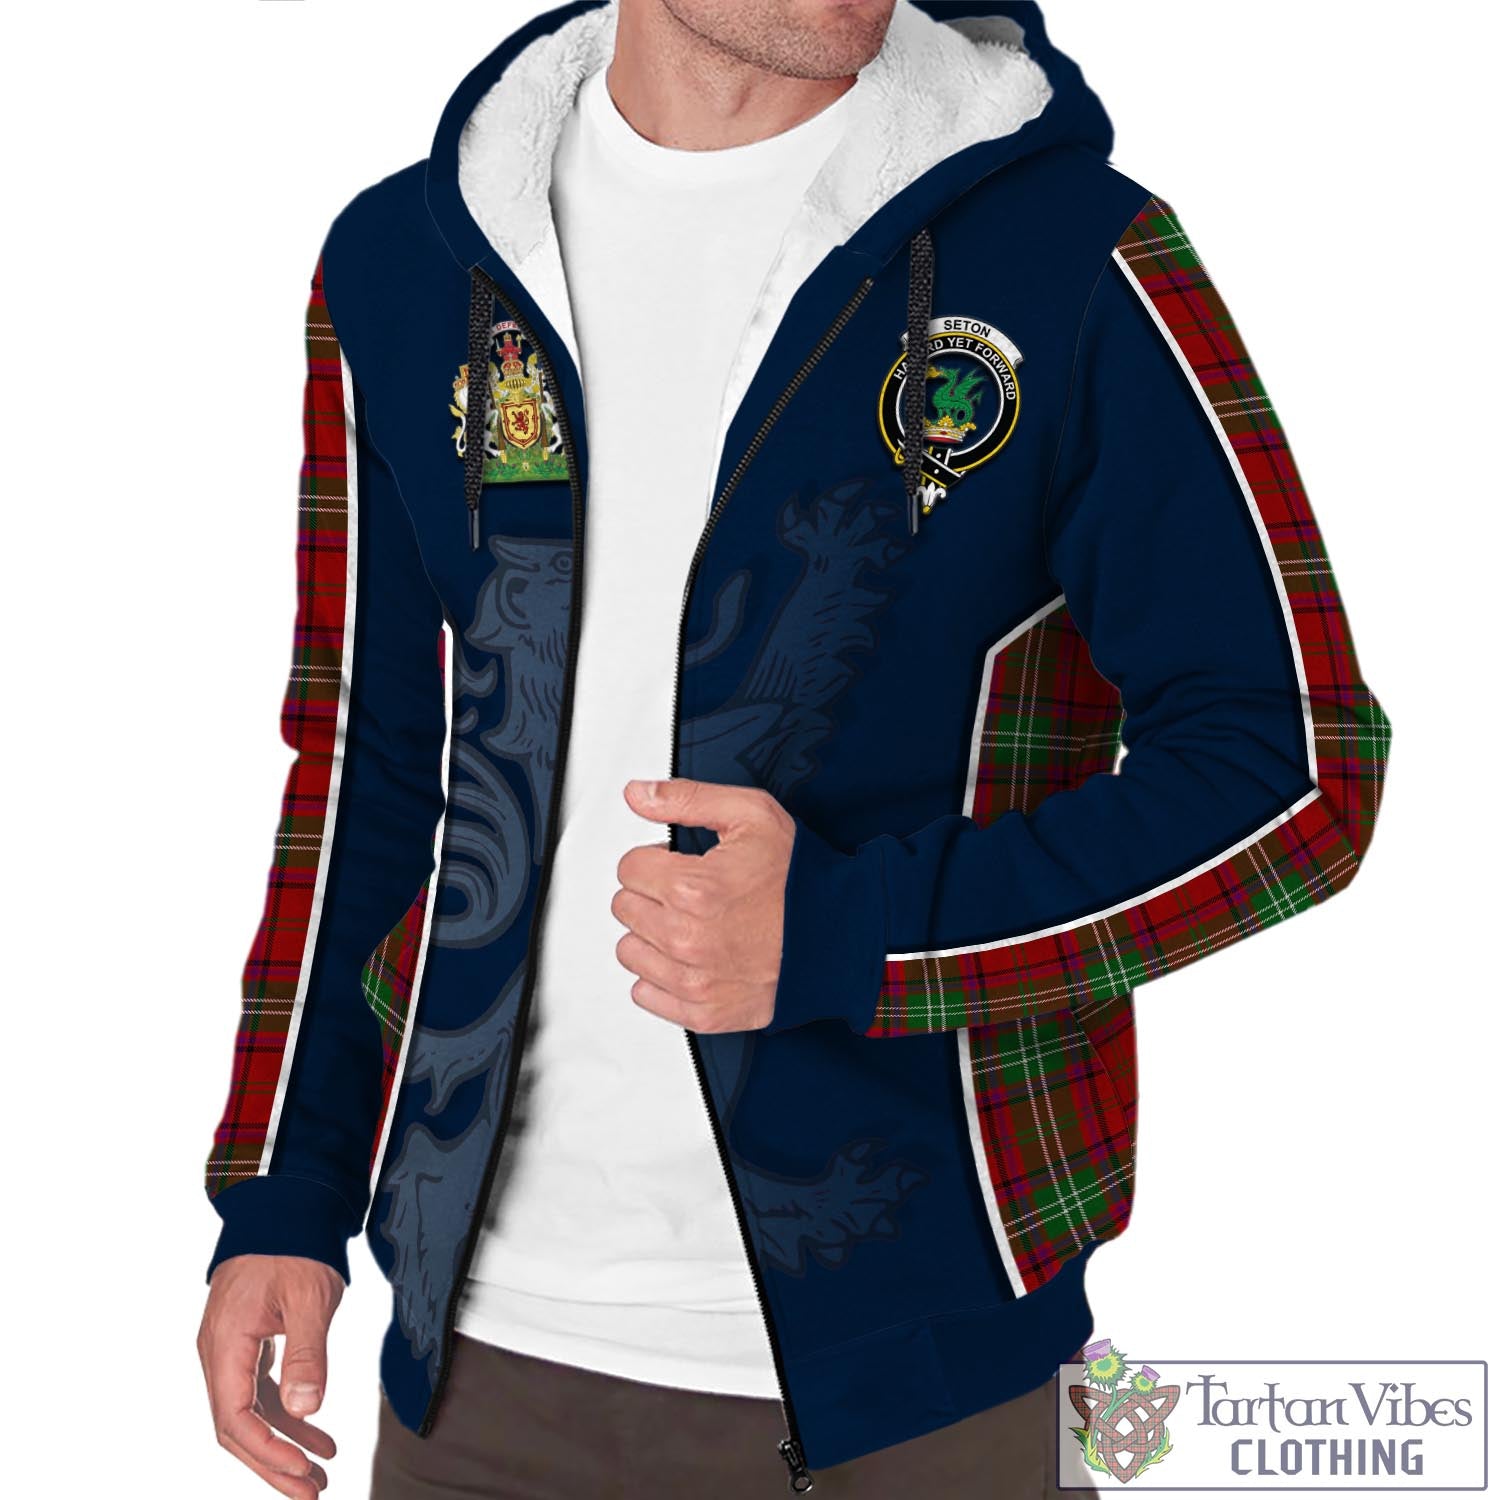 Tartan Vibes Clothing Seton Tartan Sherpa Hoodie with Family Crest and Lion Rampant Vibes Sport Style